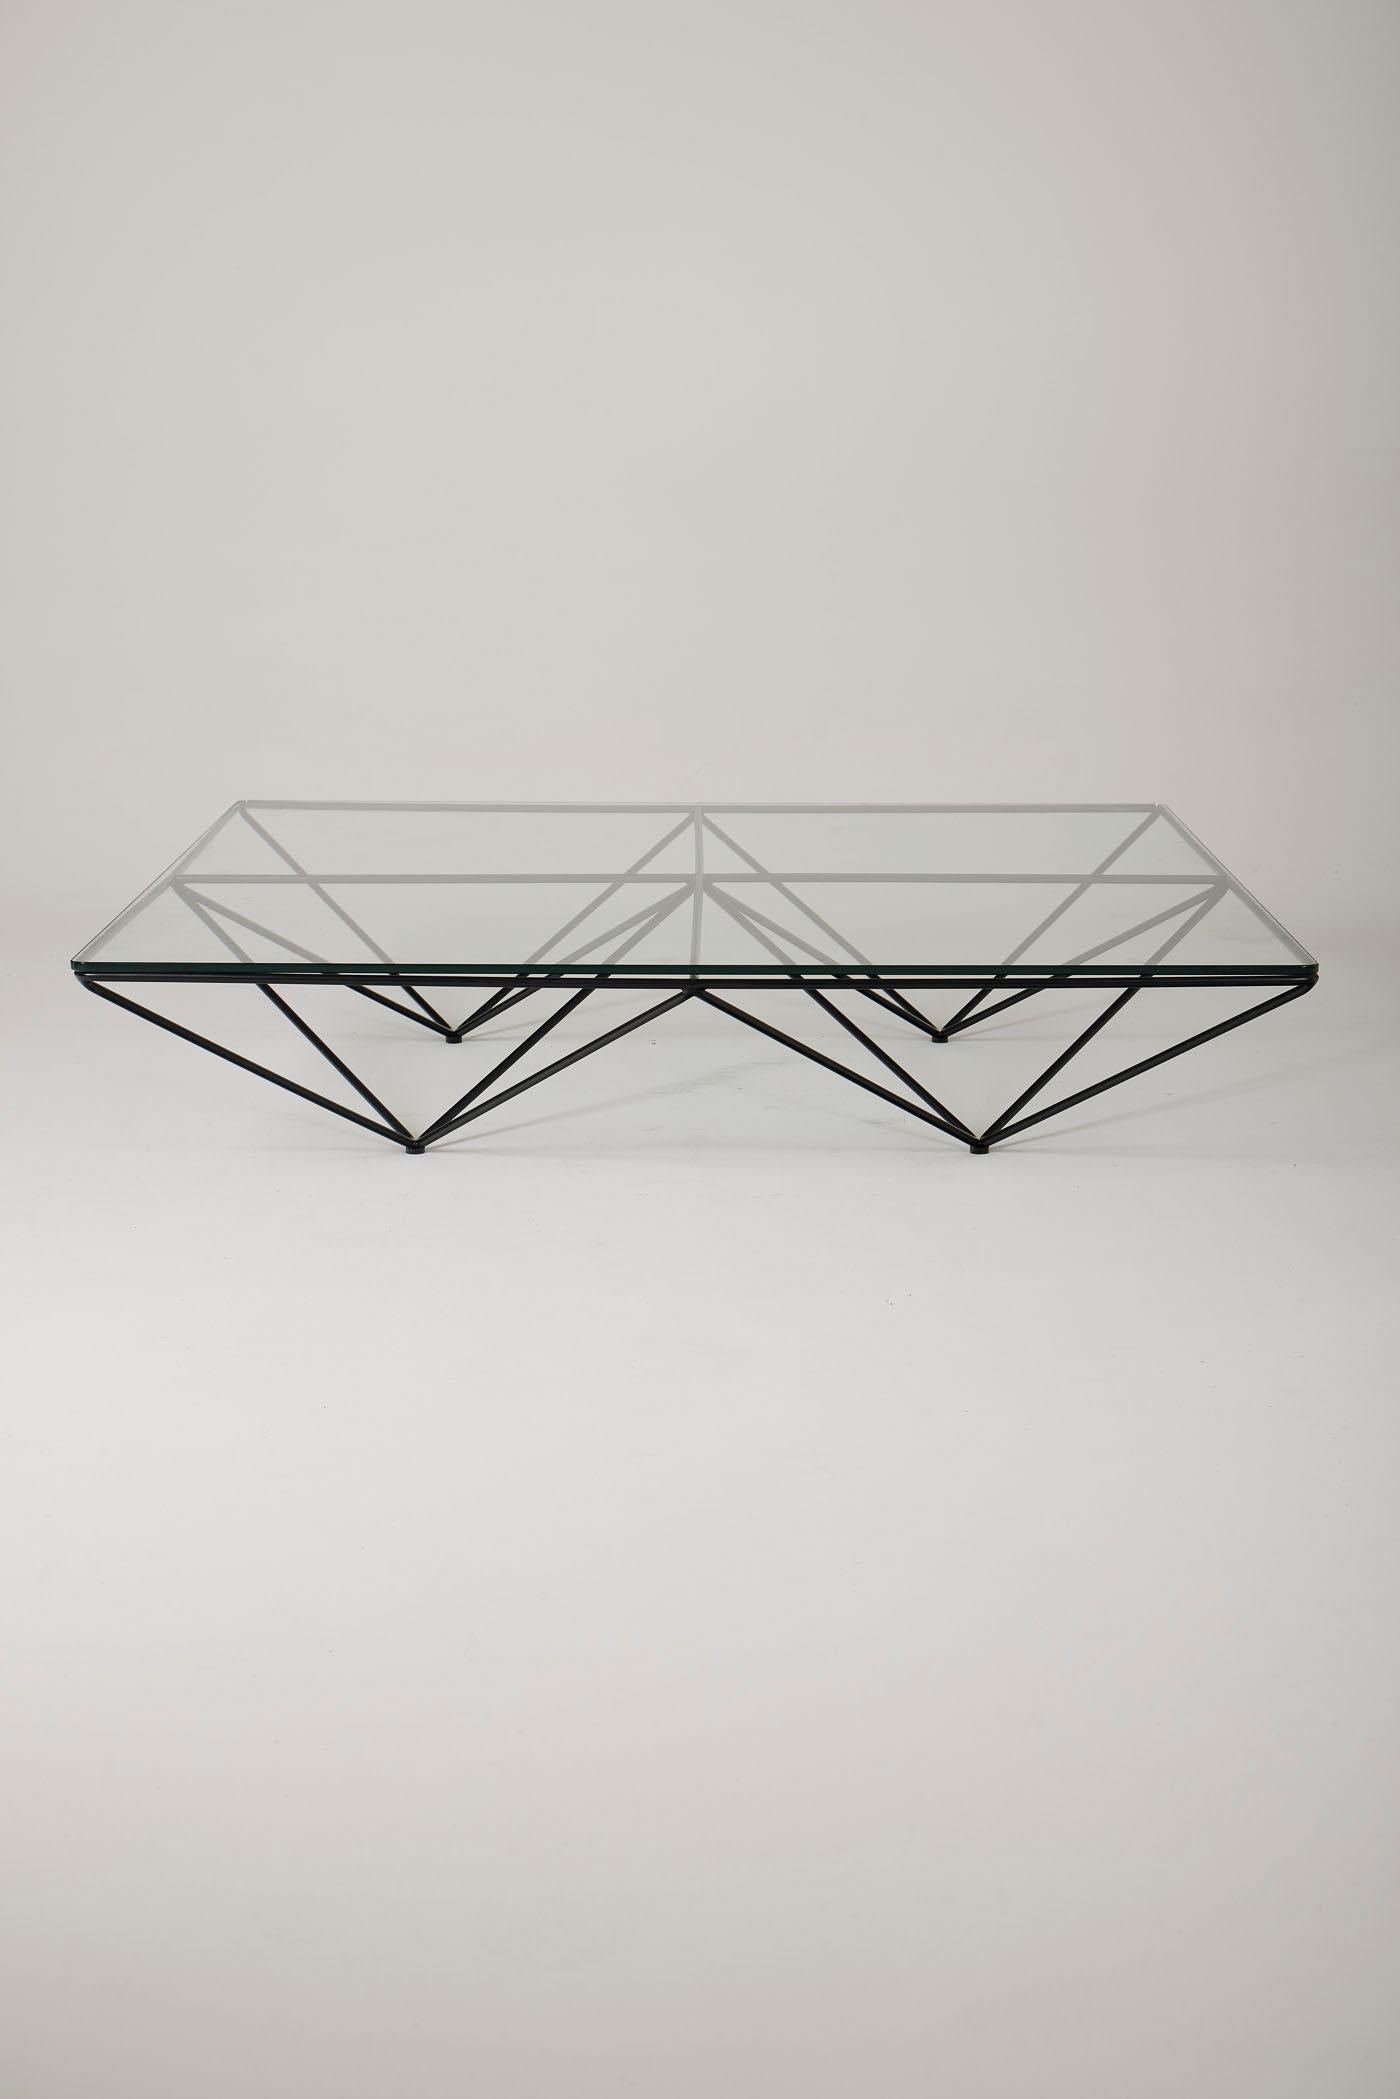 Alanda square-shaped coffee table in transparent glass by designer Paolo Piva (born in 1950) for B&B Italia, 1970s. This coffee table consists of a steel base with a pyramidal construction and a glass plate serving as the tabletop. In very good